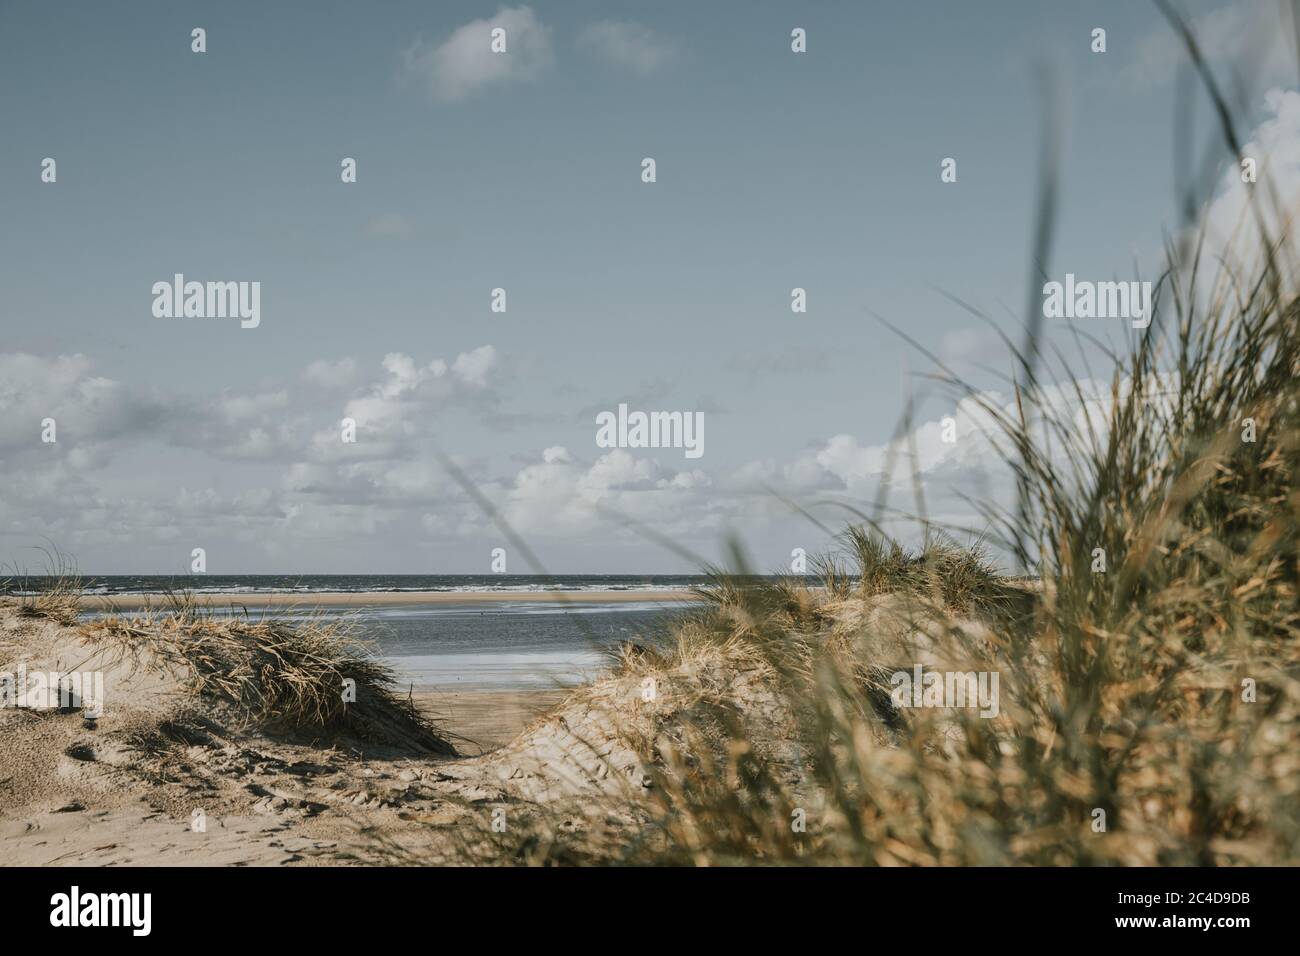 Marram grass and sand dunes on sandy beach of Northern sea on Rømø island in Denmark during the windy day with blue cloudy sky above in muted colors Stock Photo